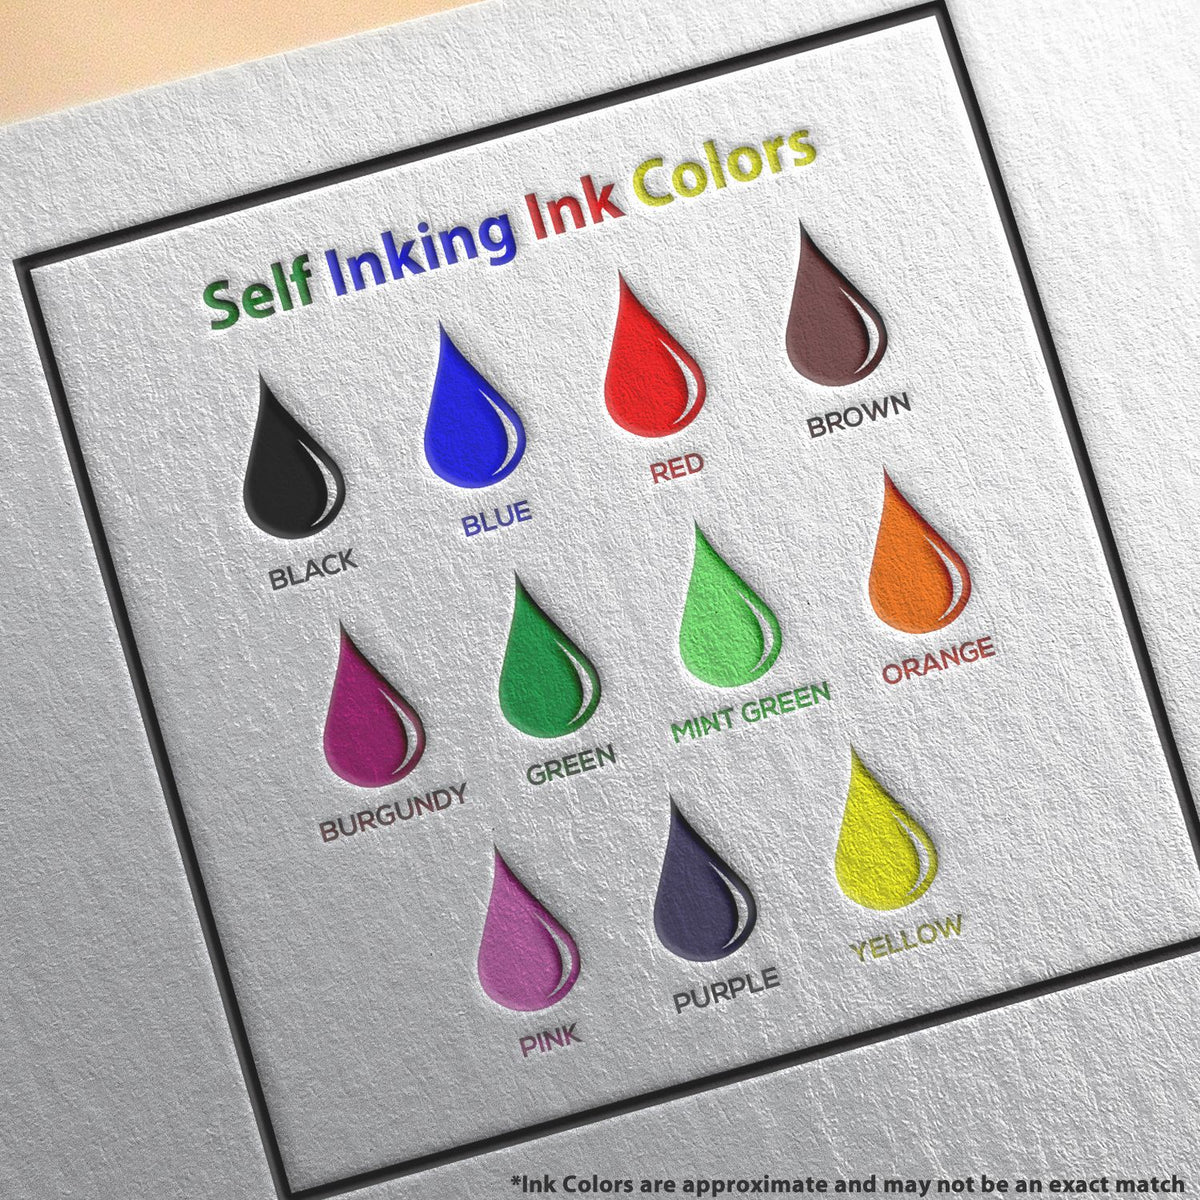 A picture showing the different ink colors or hues available for the Self-Inking Ohio PE Stamp product.